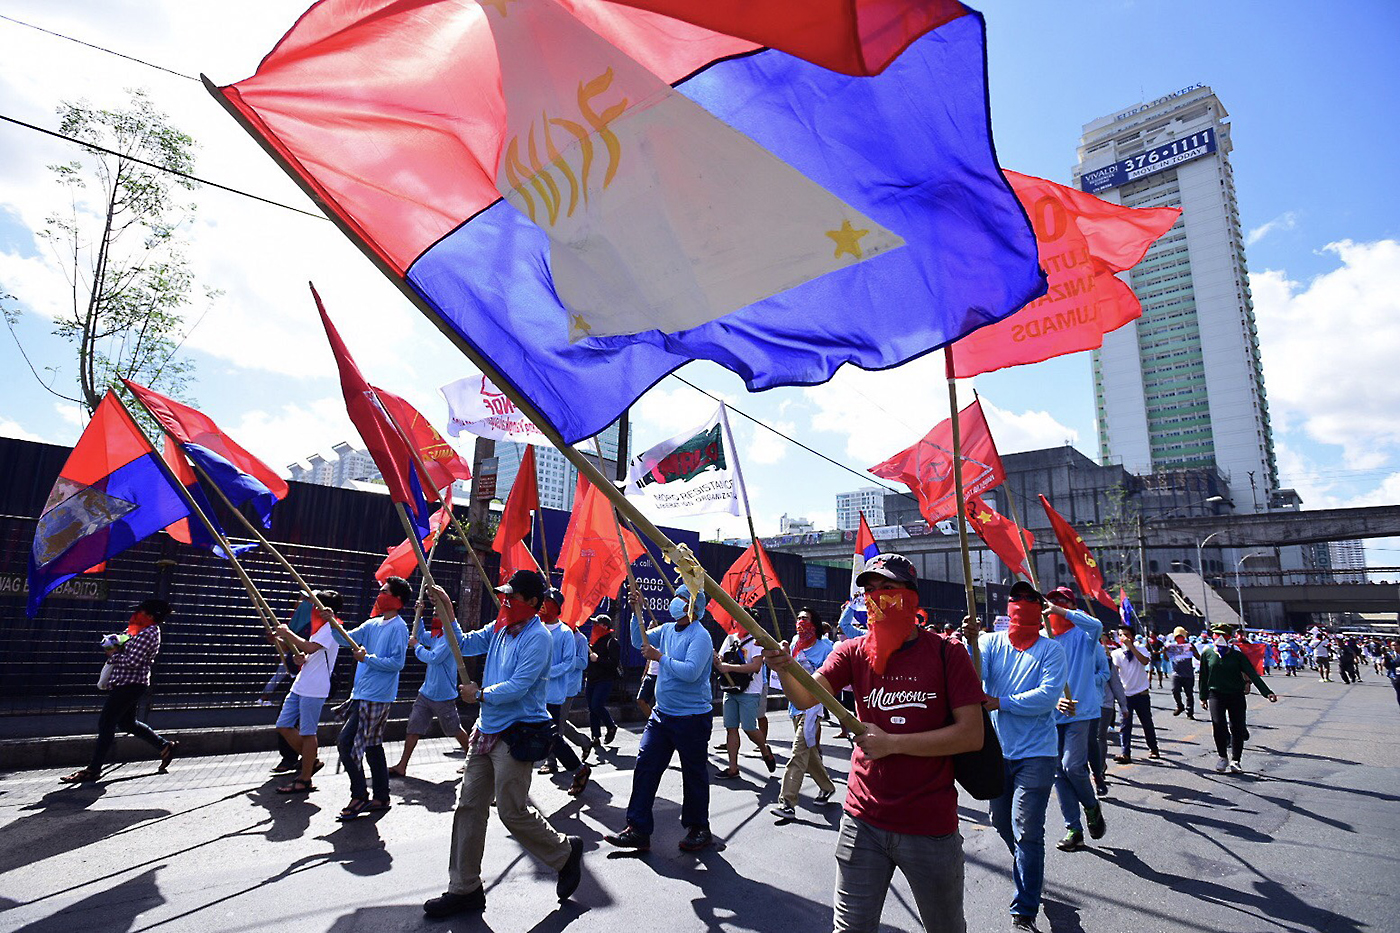 LIGHTNING RALLY. Supporters of the National Democratic Front Philippines march along Aurora Blvd. in Cubao, Quezon City on April 23, 2018, to mark the 45th anniversary of the revolutionary front. All photos by Maria Tan, DarrenLangit/Rappler 